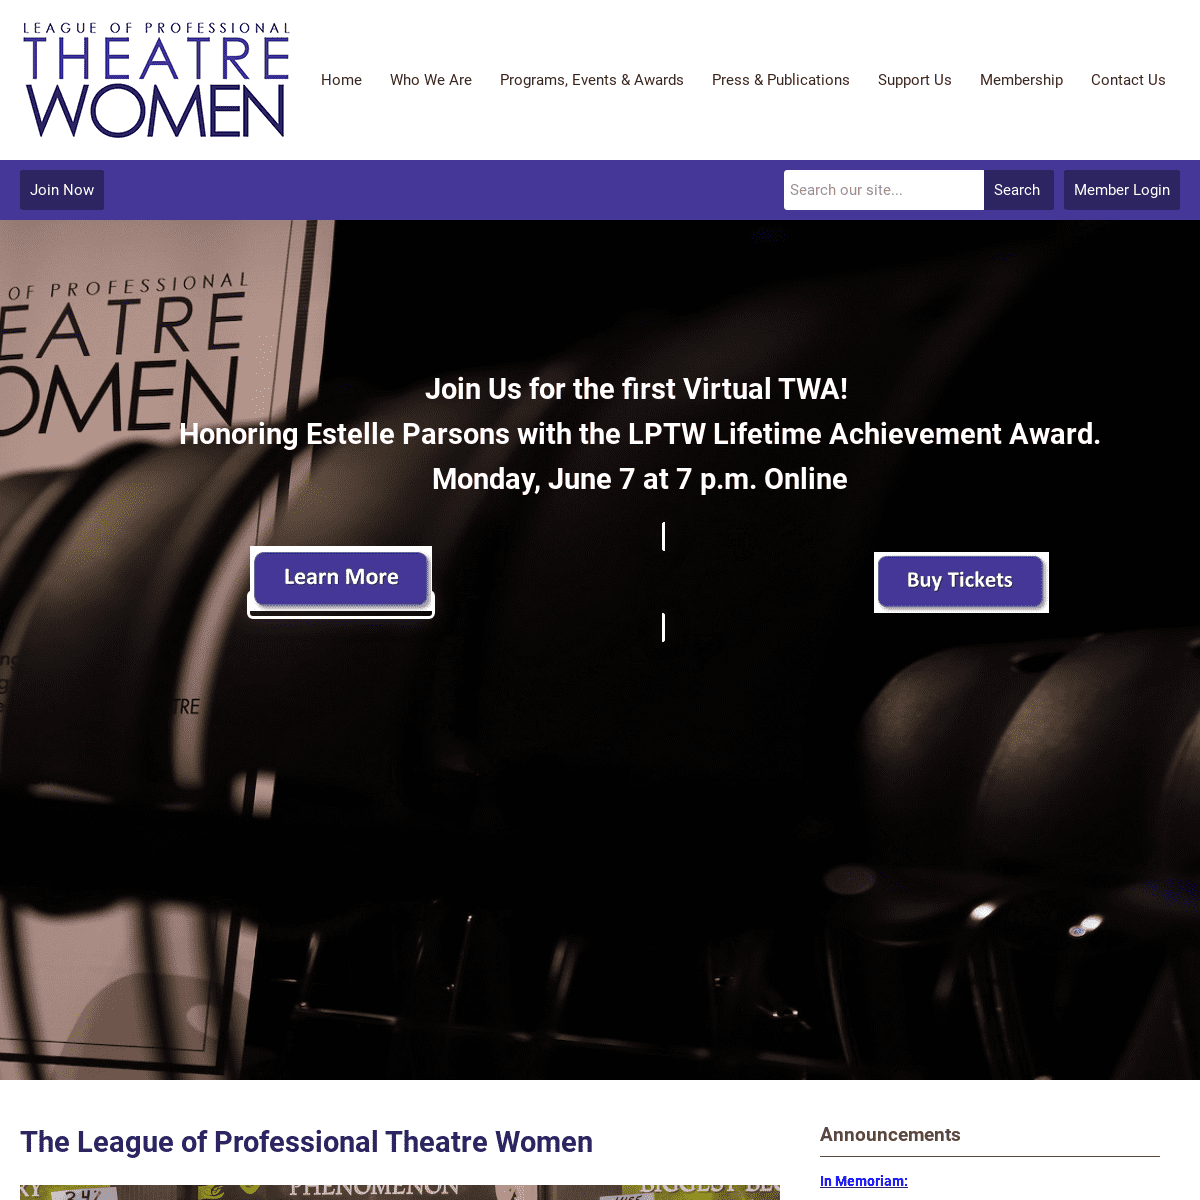 A complete backup of https://theatrewomen.org